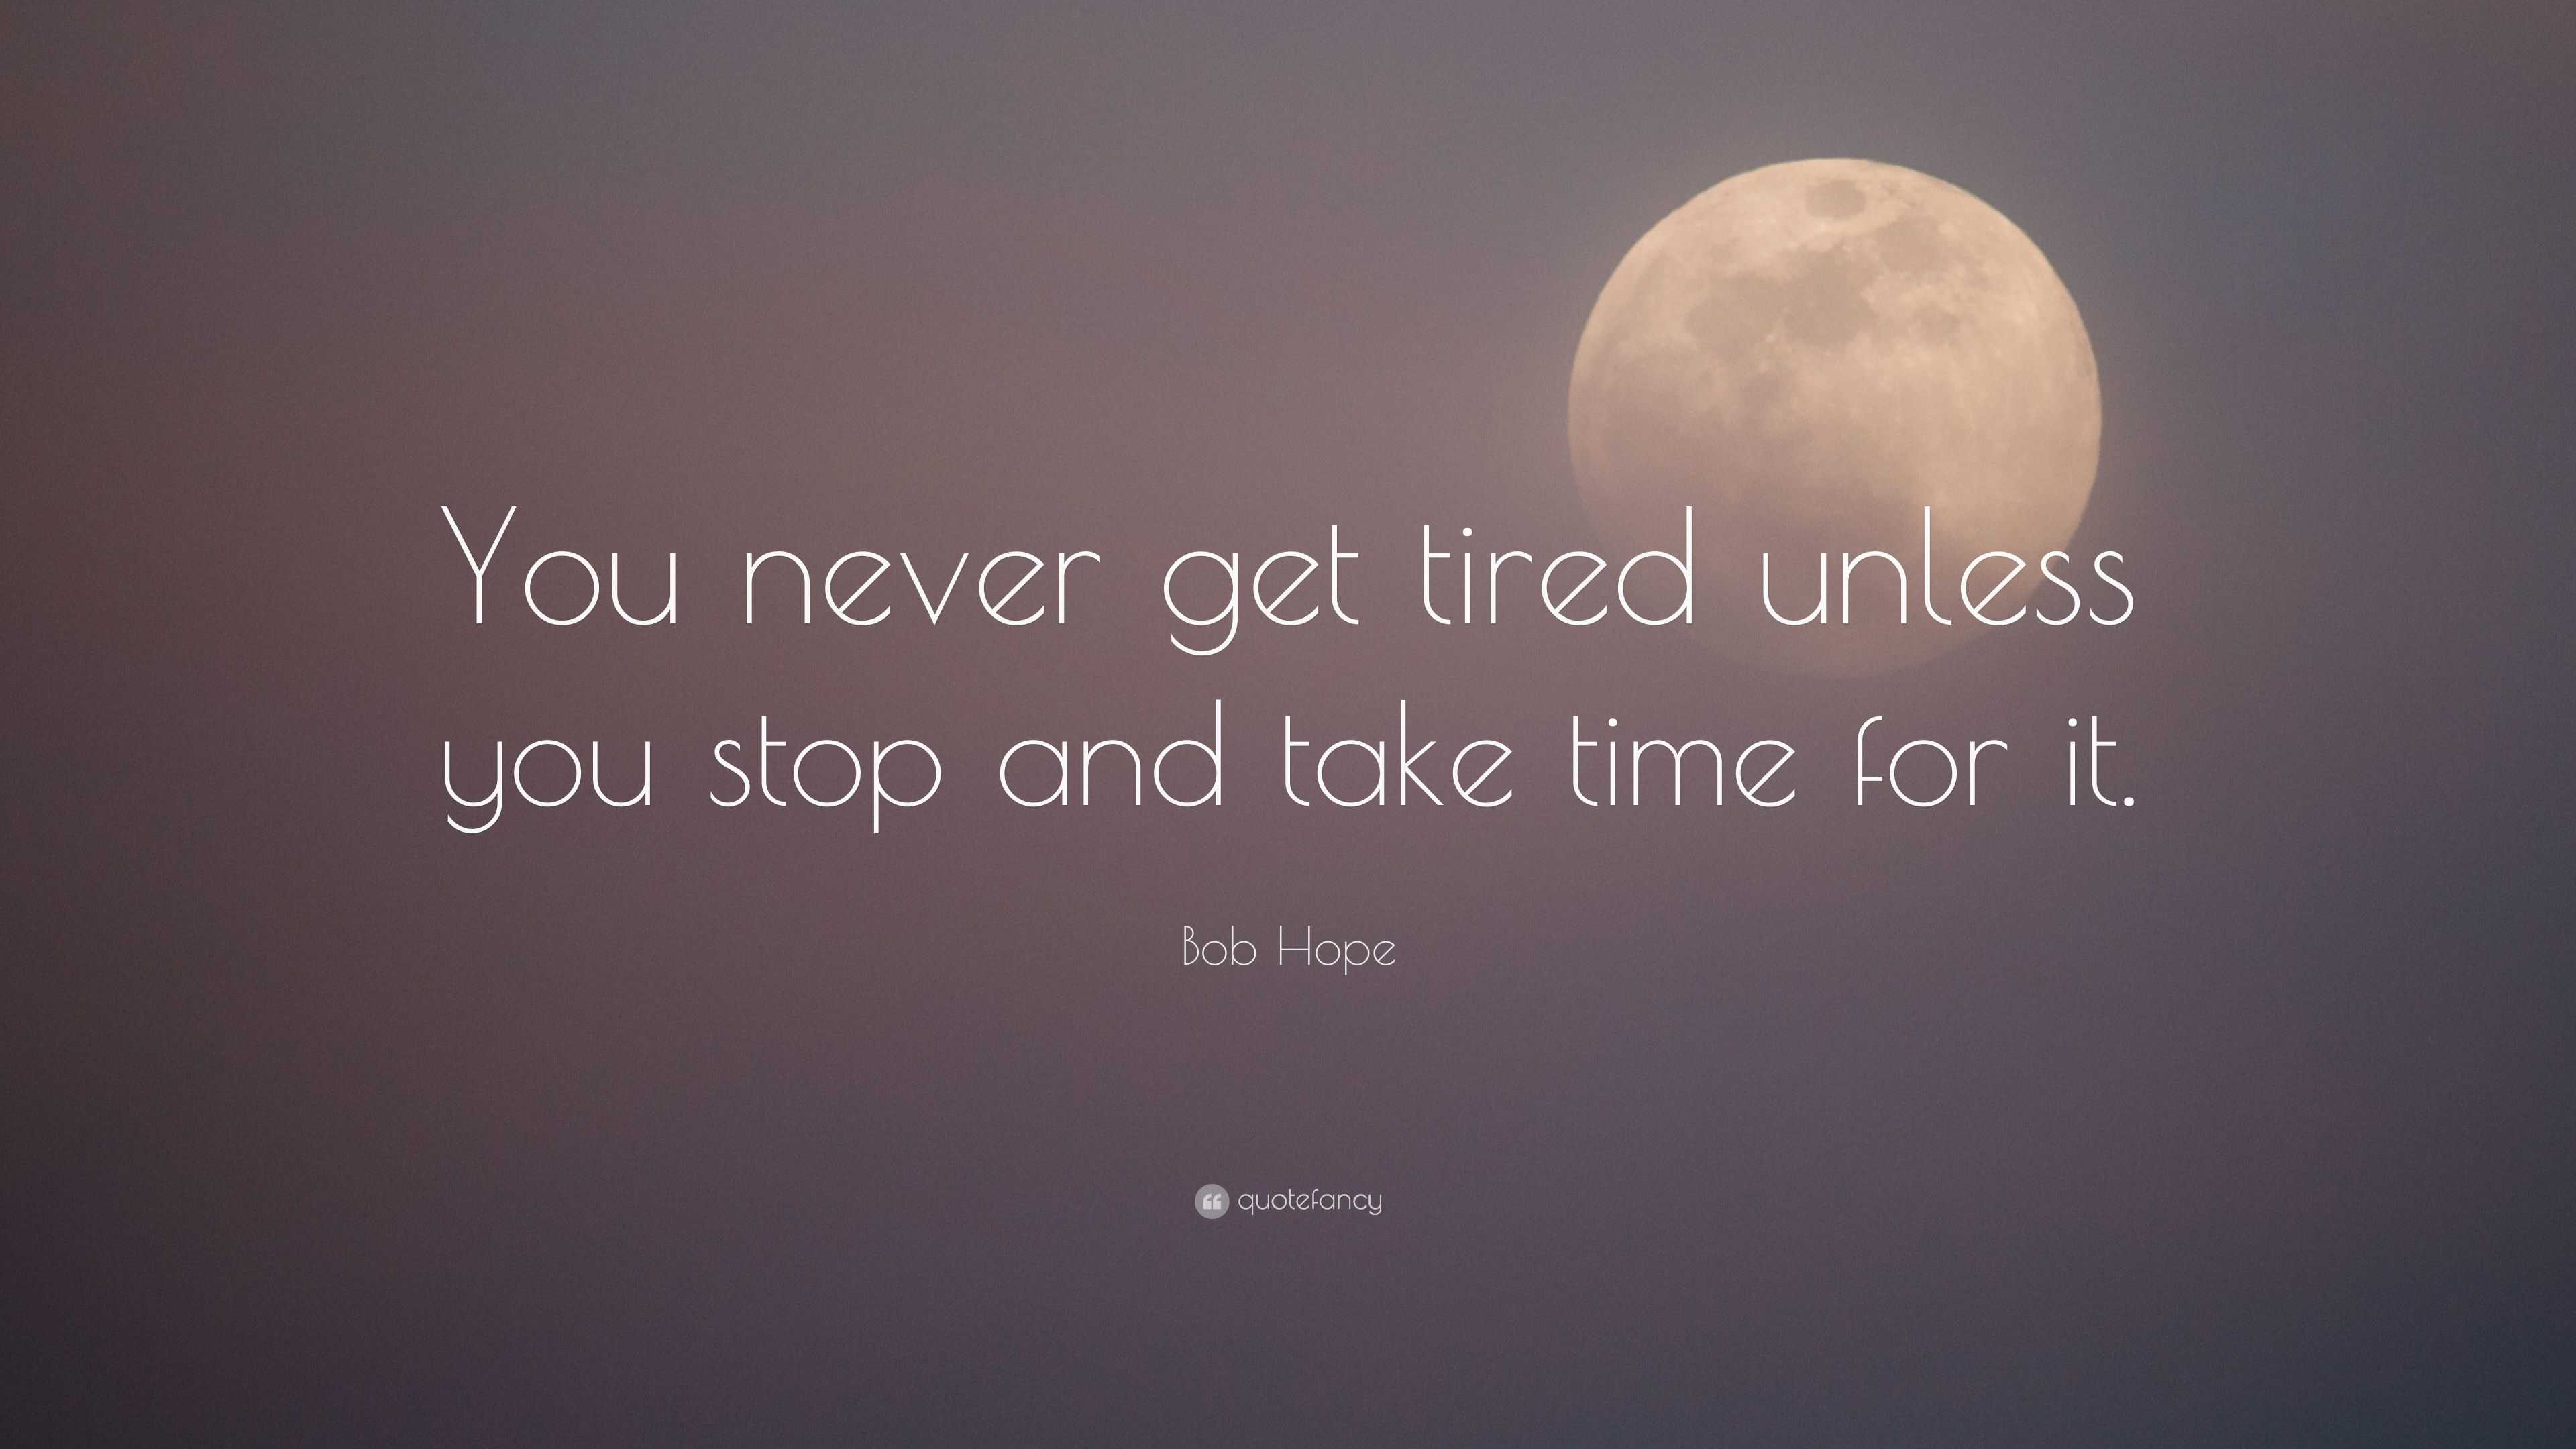 Bob Hope Quote: “You never get tired unless you stop and take time for it.”